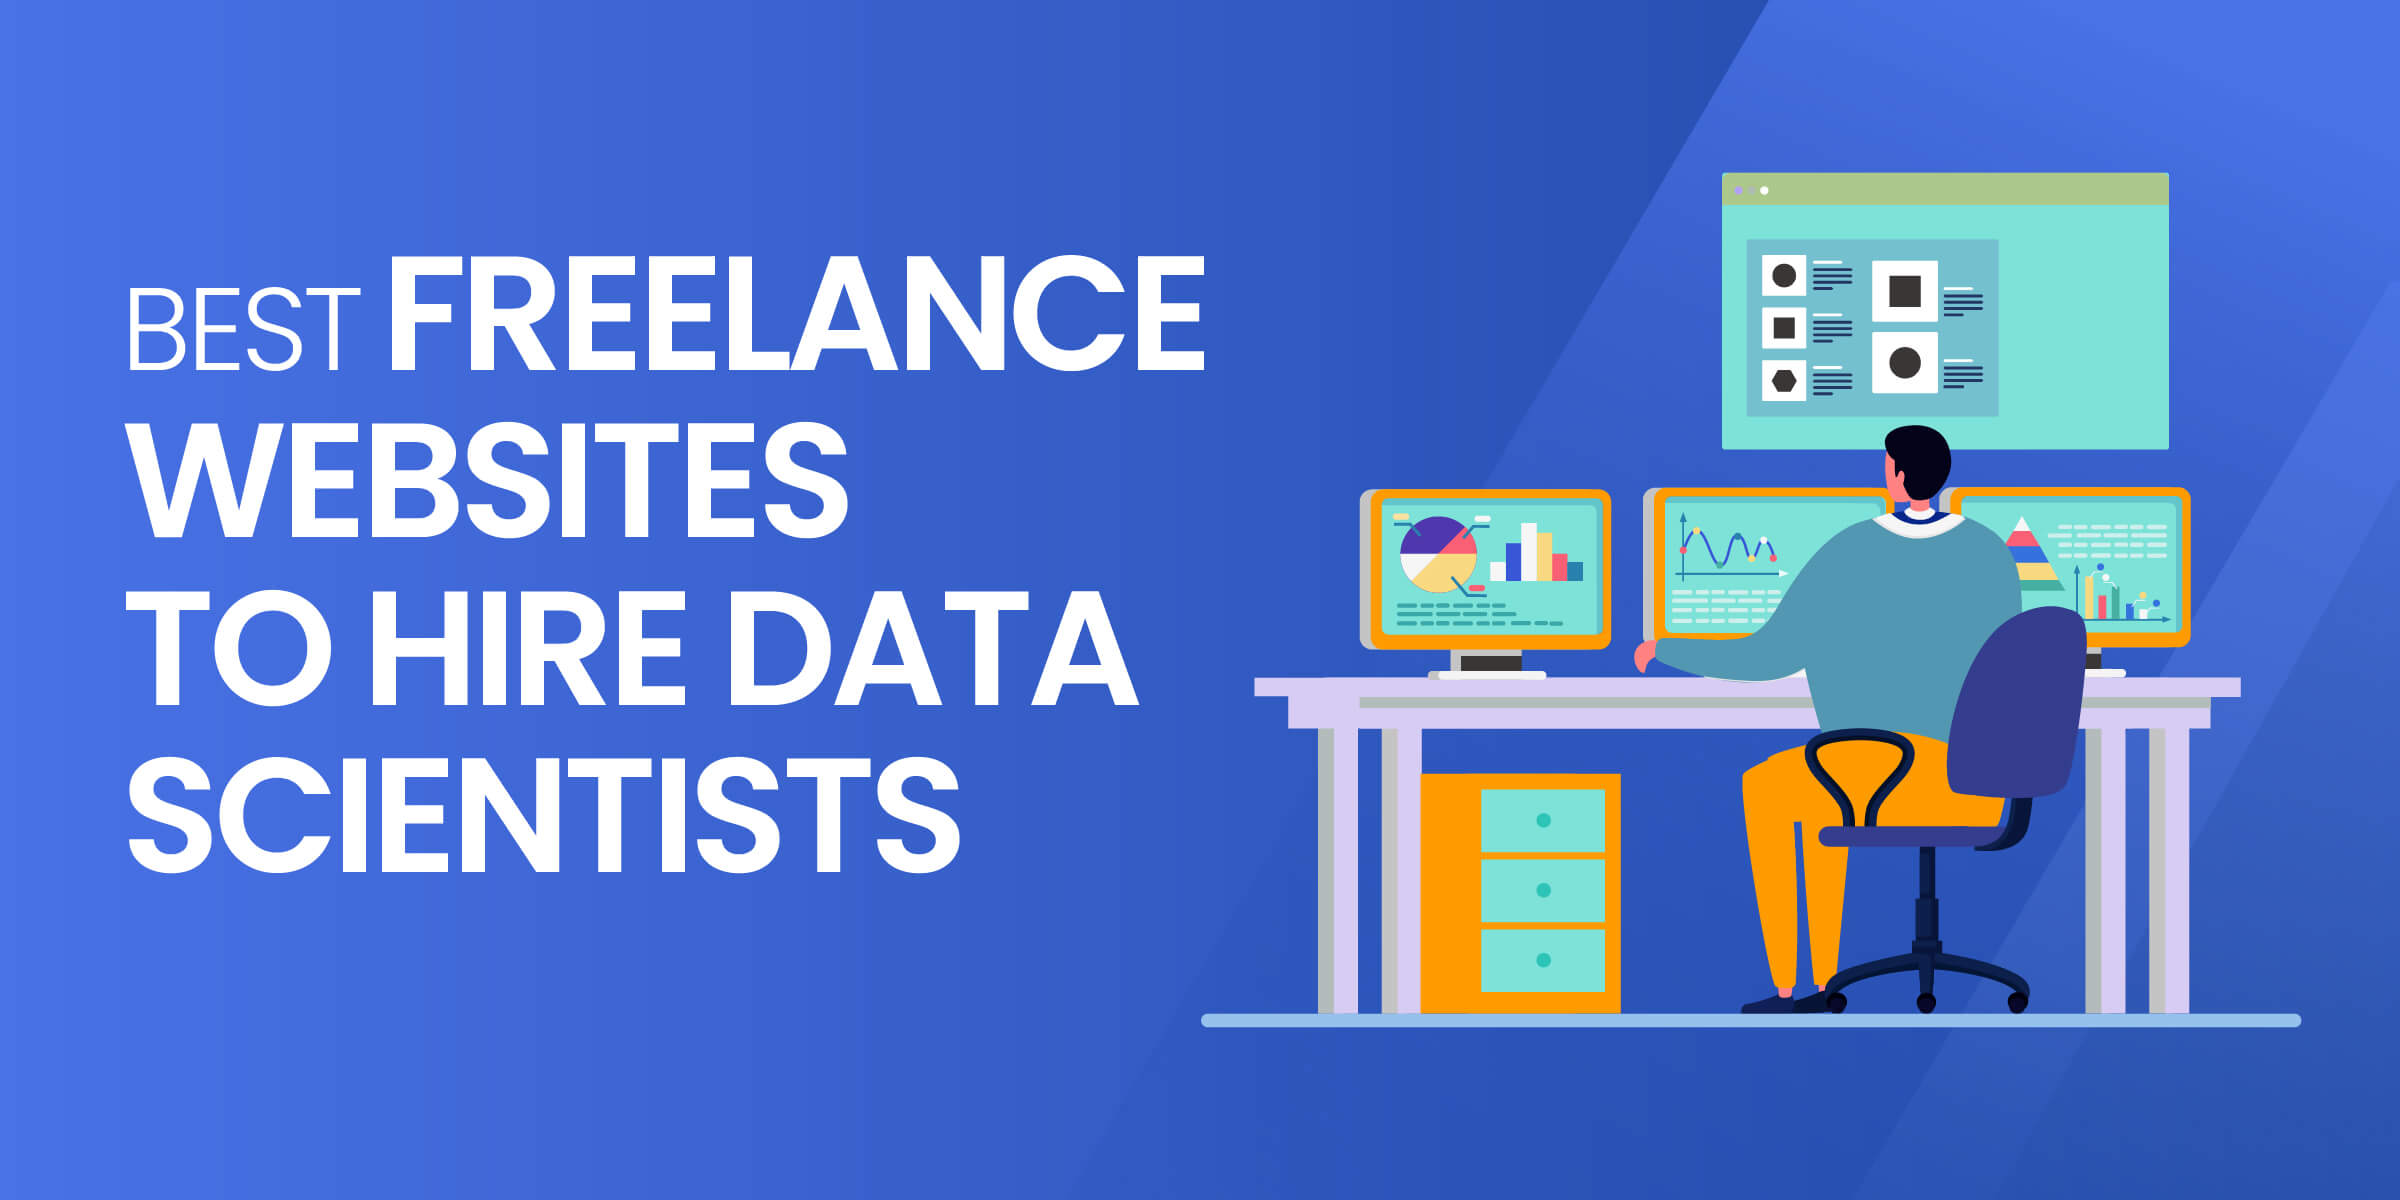 Best Freelance Websites to Hire Data Scientists